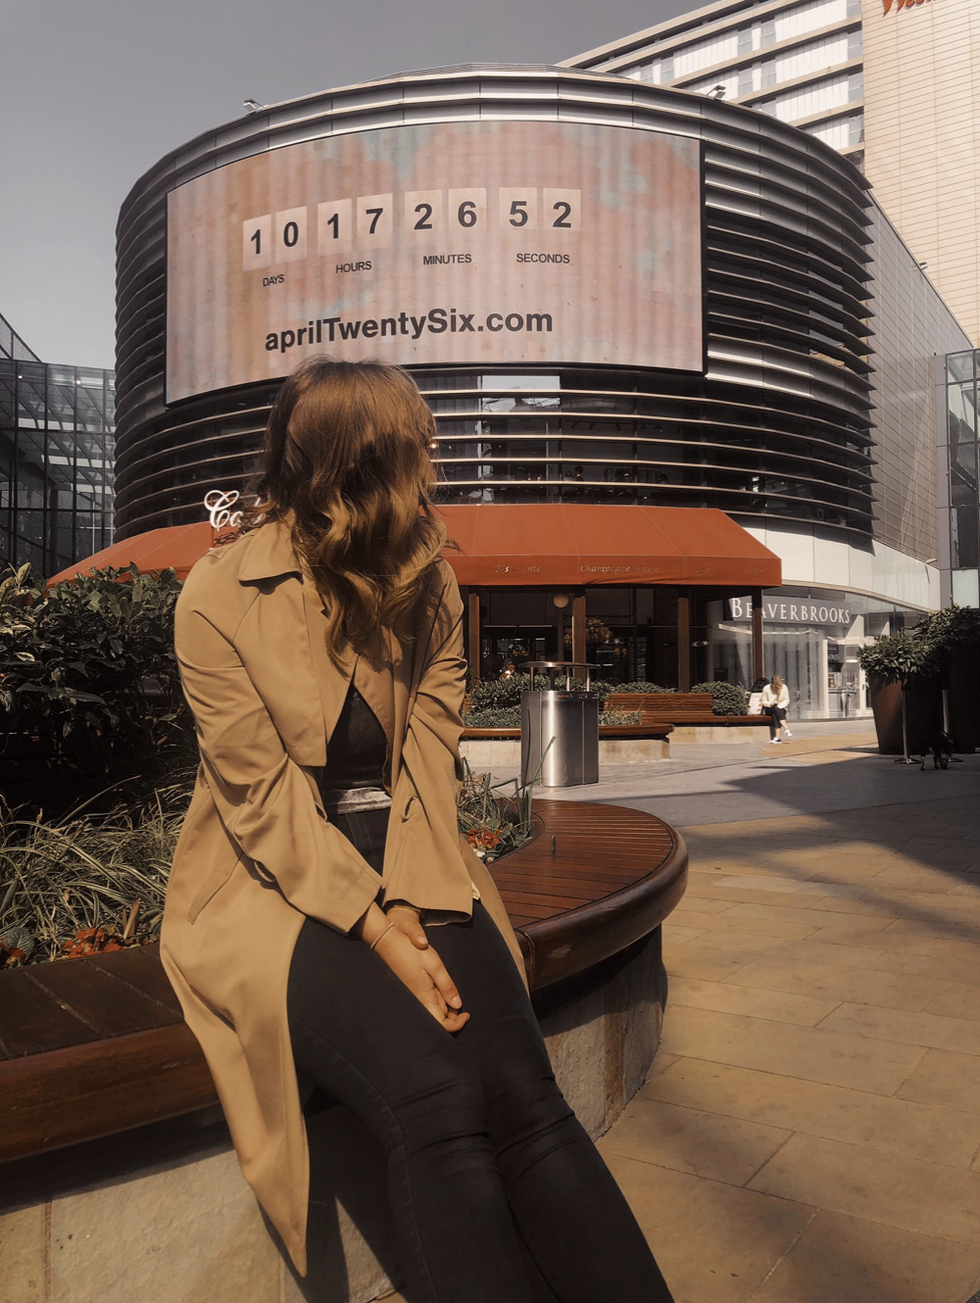 Architecture, Photography, Brown hair, City, 